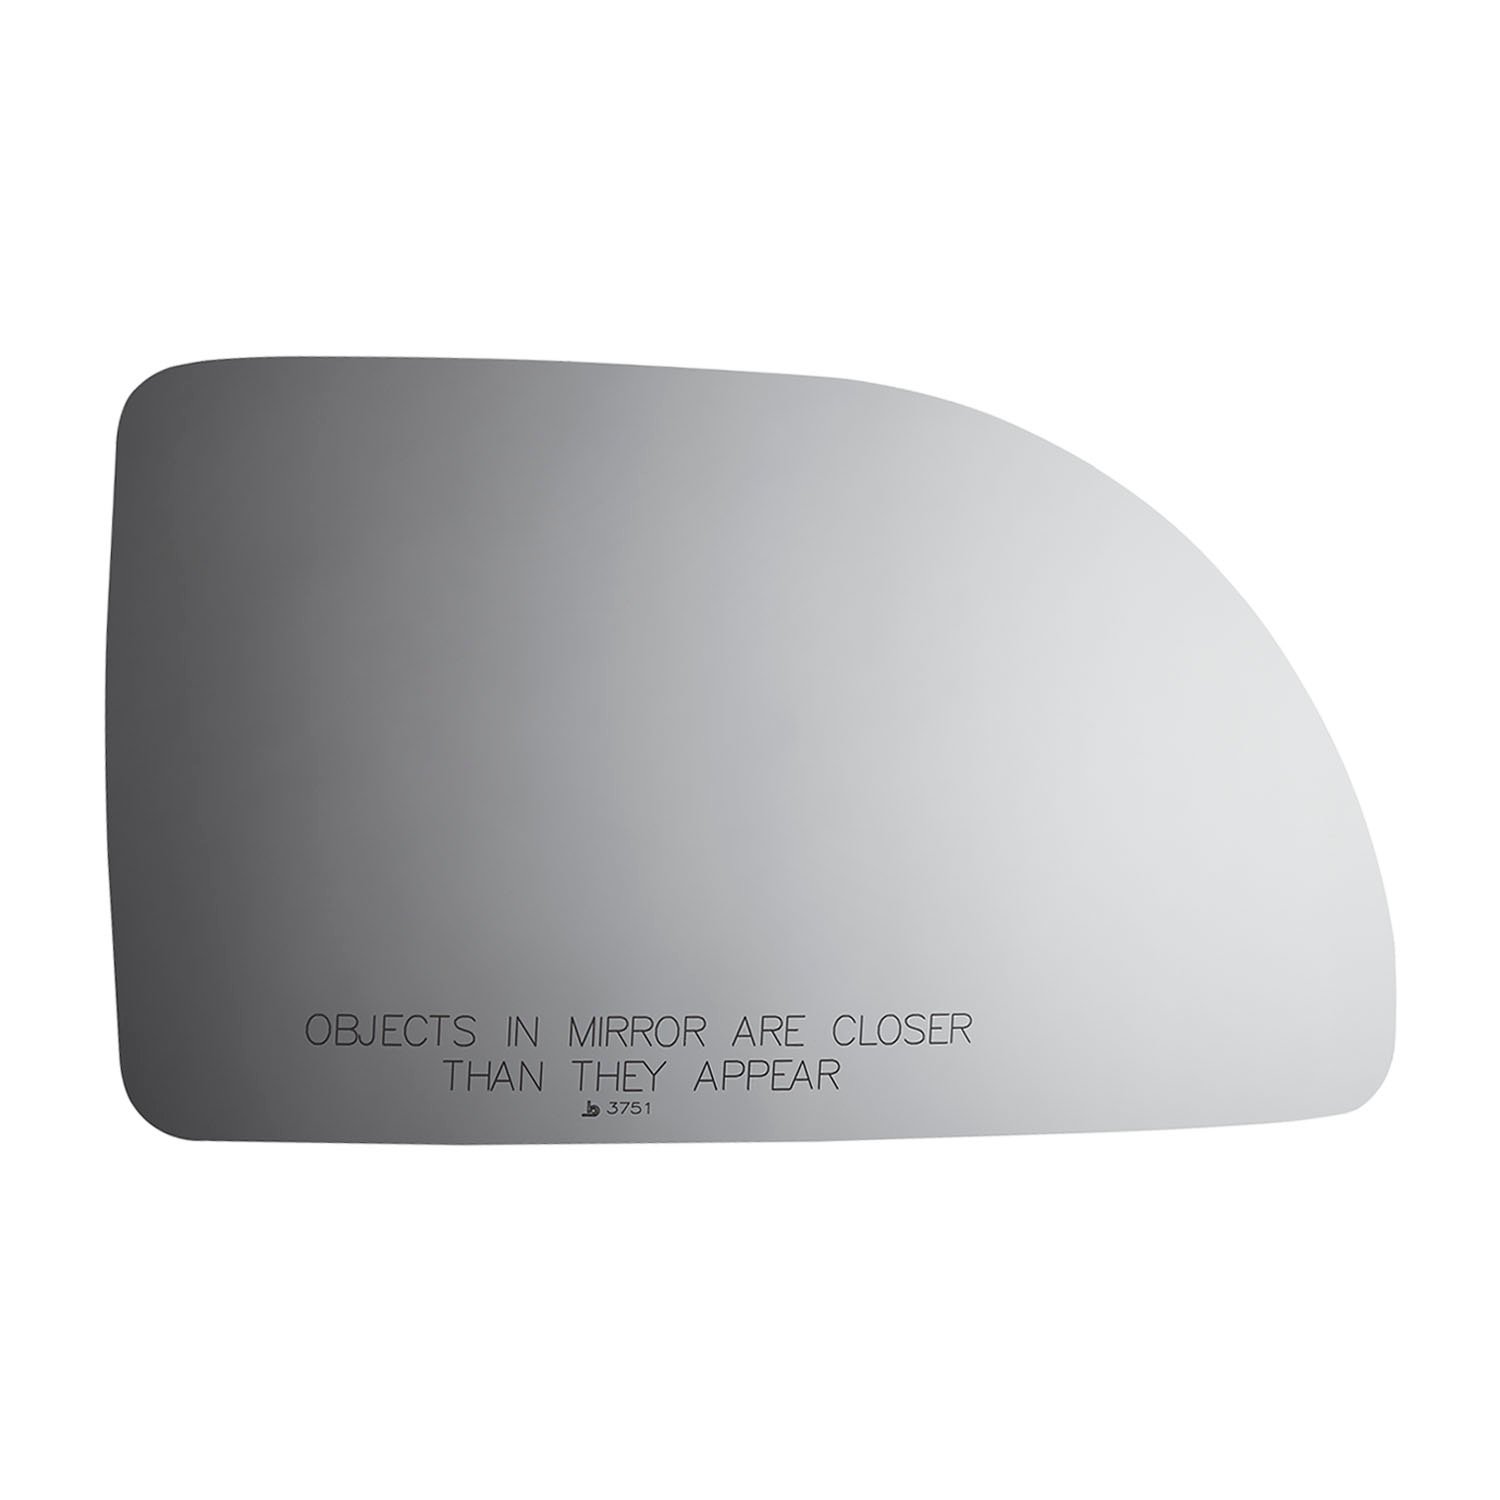 3751 SIDE VIEW MIRROR